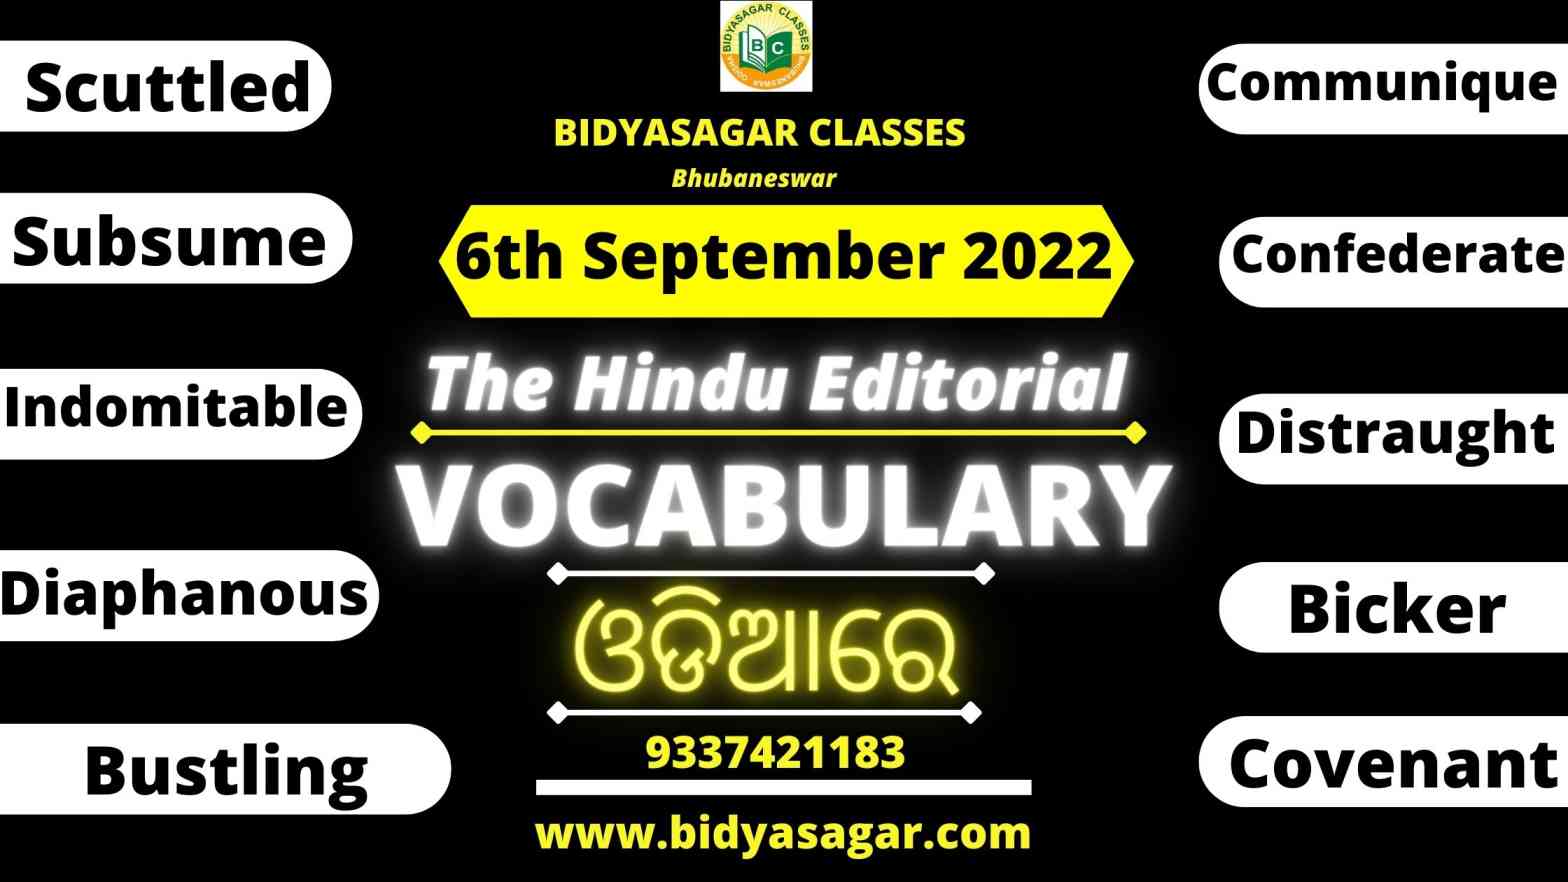 The Hindu Editorial Vocabulary of 6th September 2022